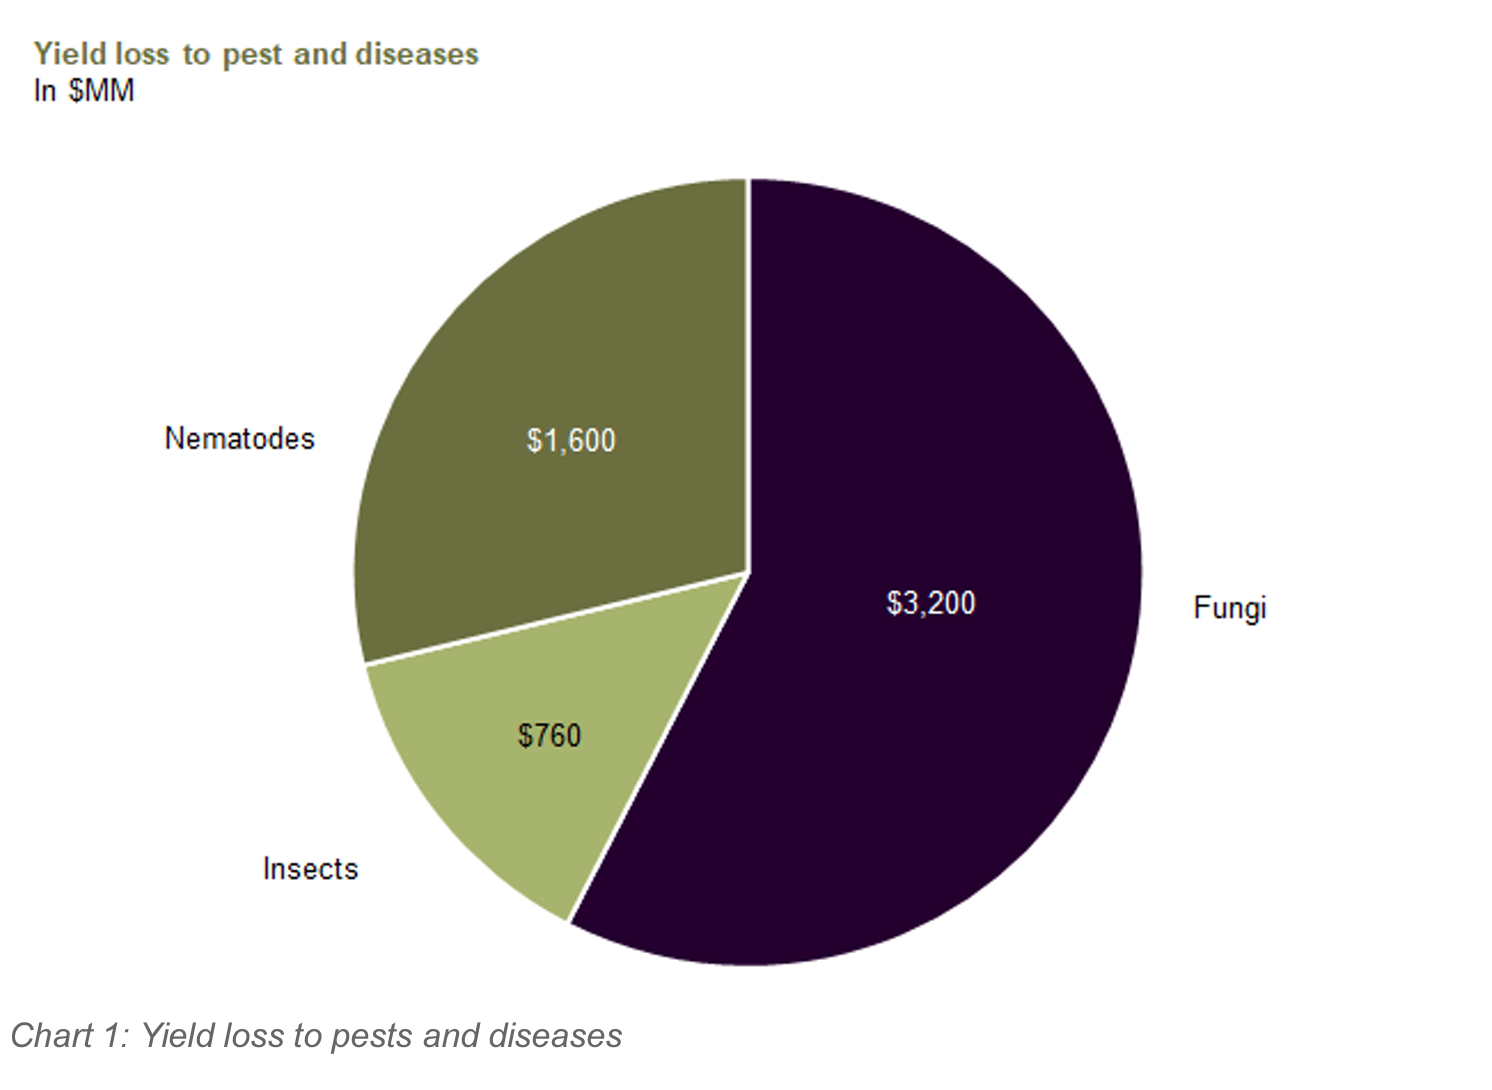 A pie chart showing yield loss due to pest and diseases amongst American farmers.